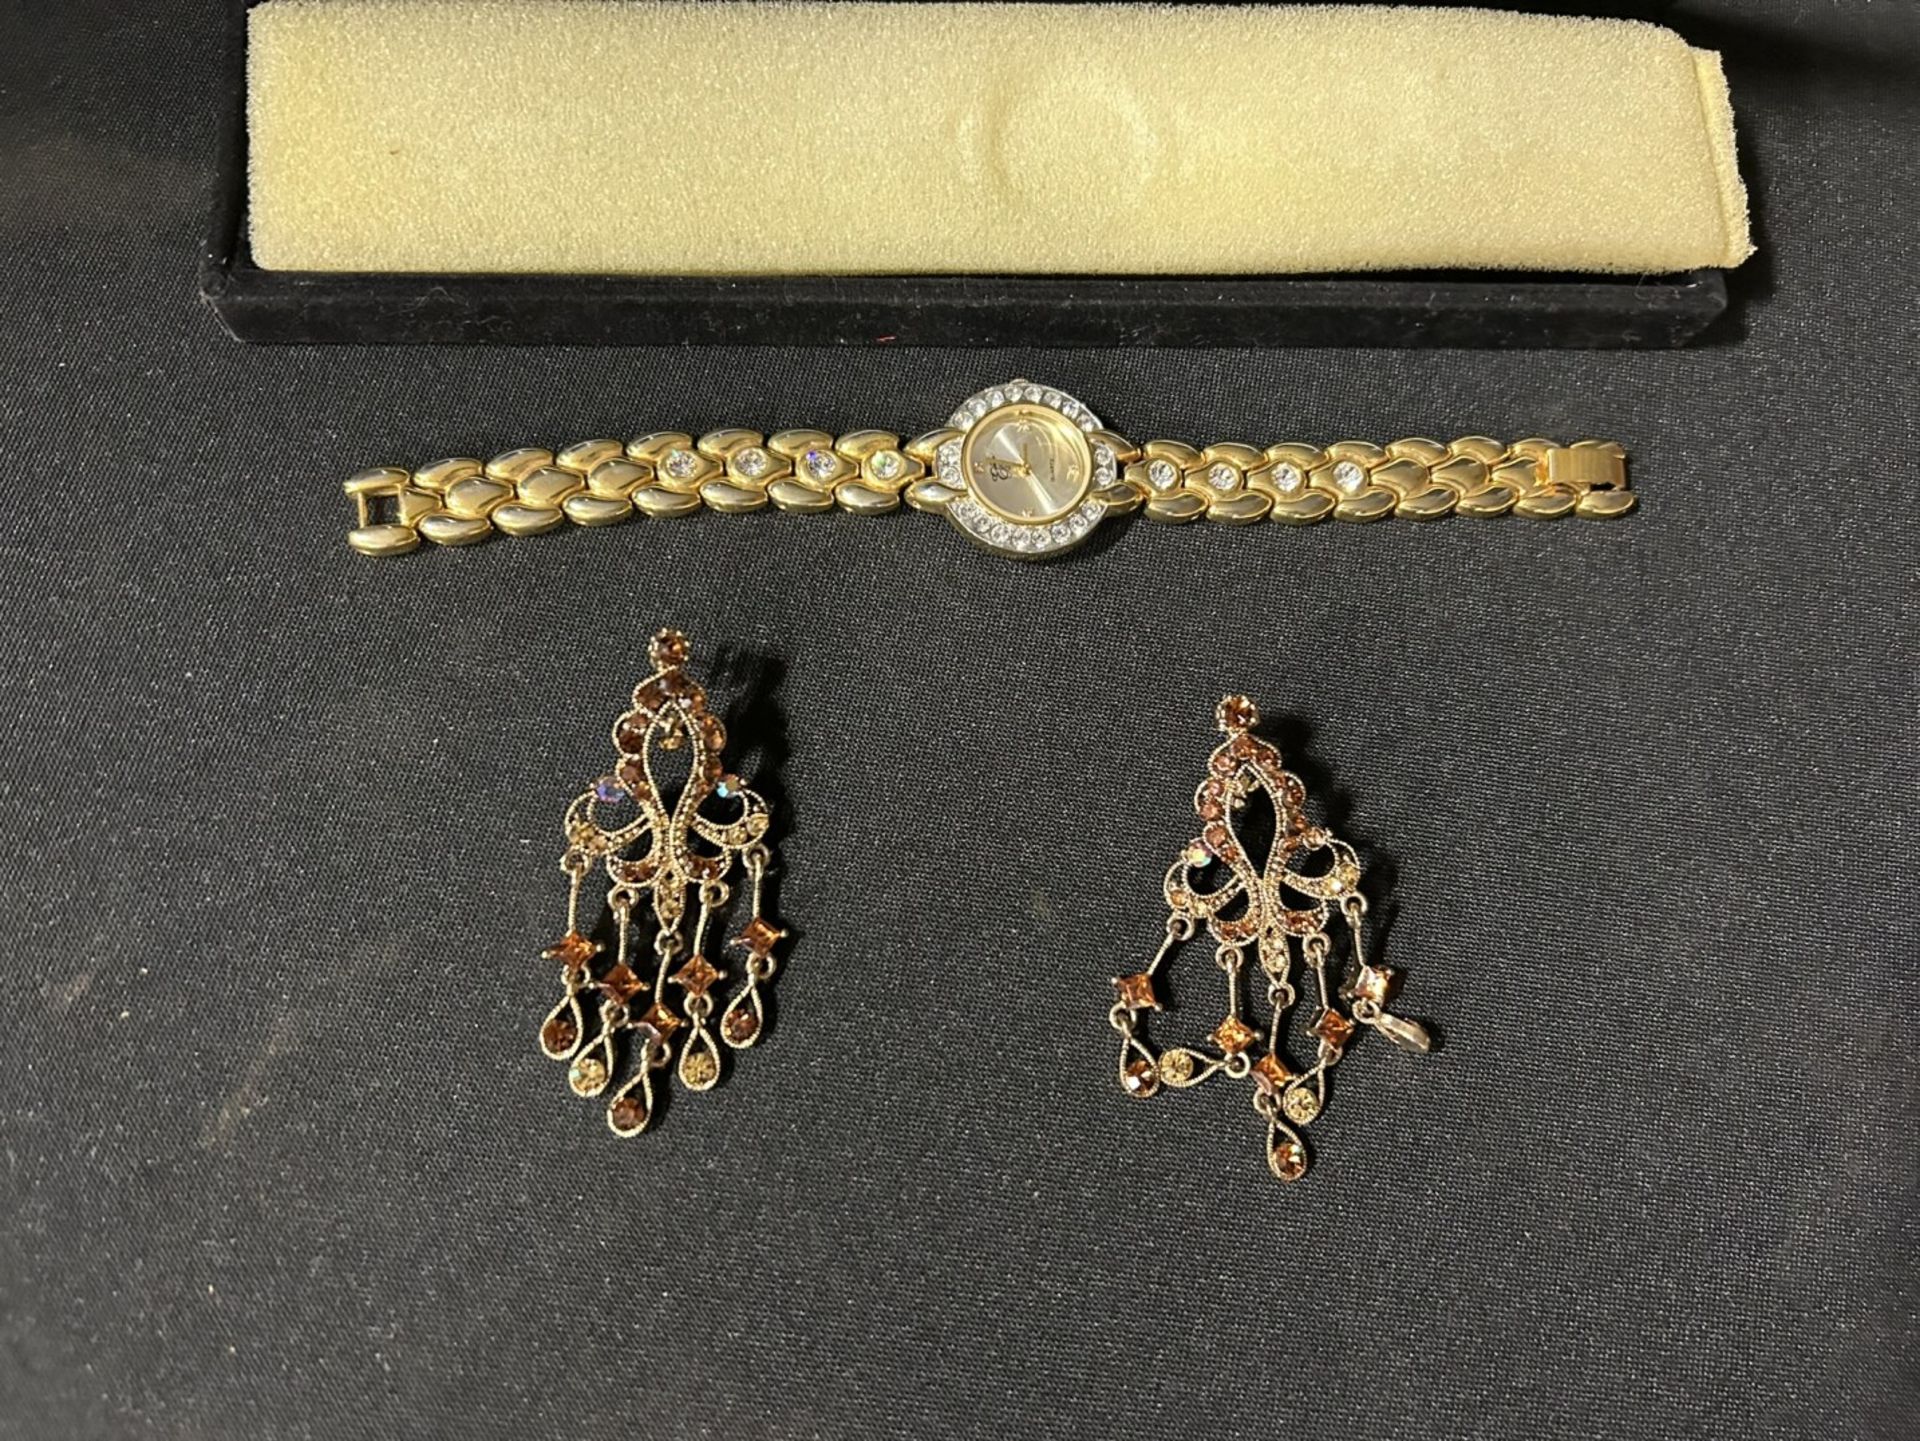 EJ WOMEN'S WATCH AND EAR RINGS - Image 2 of 4